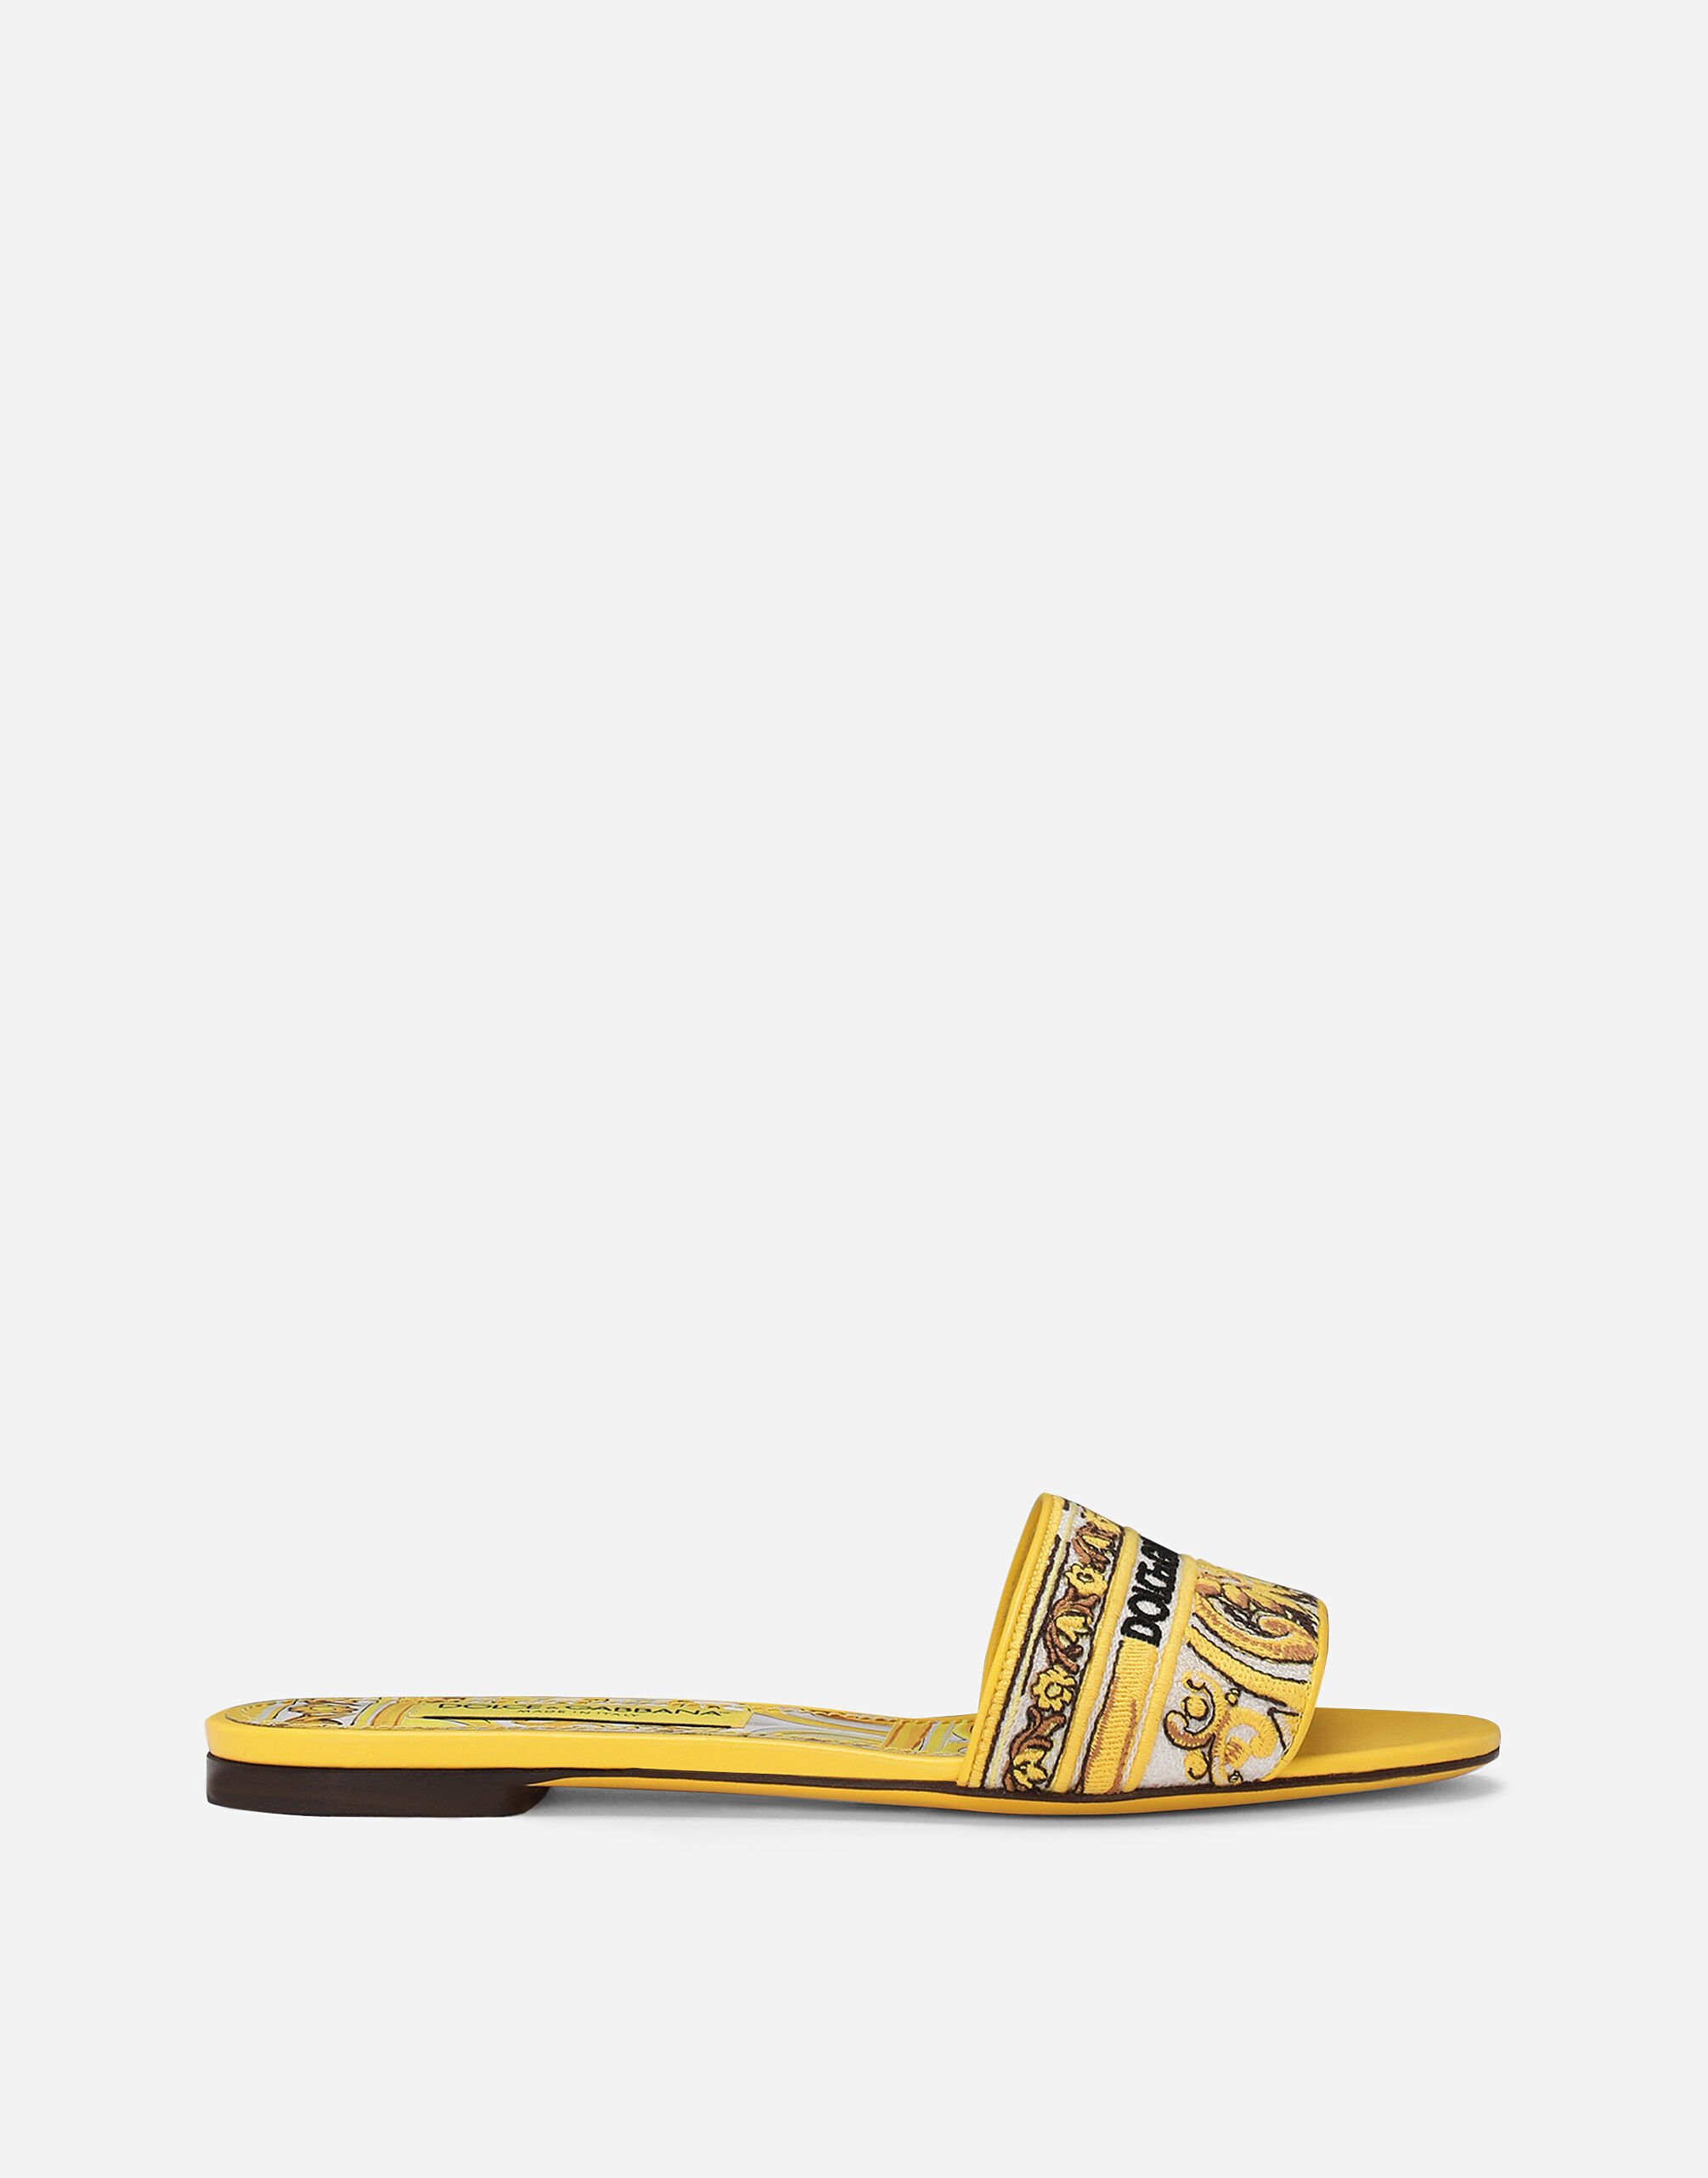 Dolce & Gabbana Sliders with embroidered majolica pattern Yellow BB6003AW050